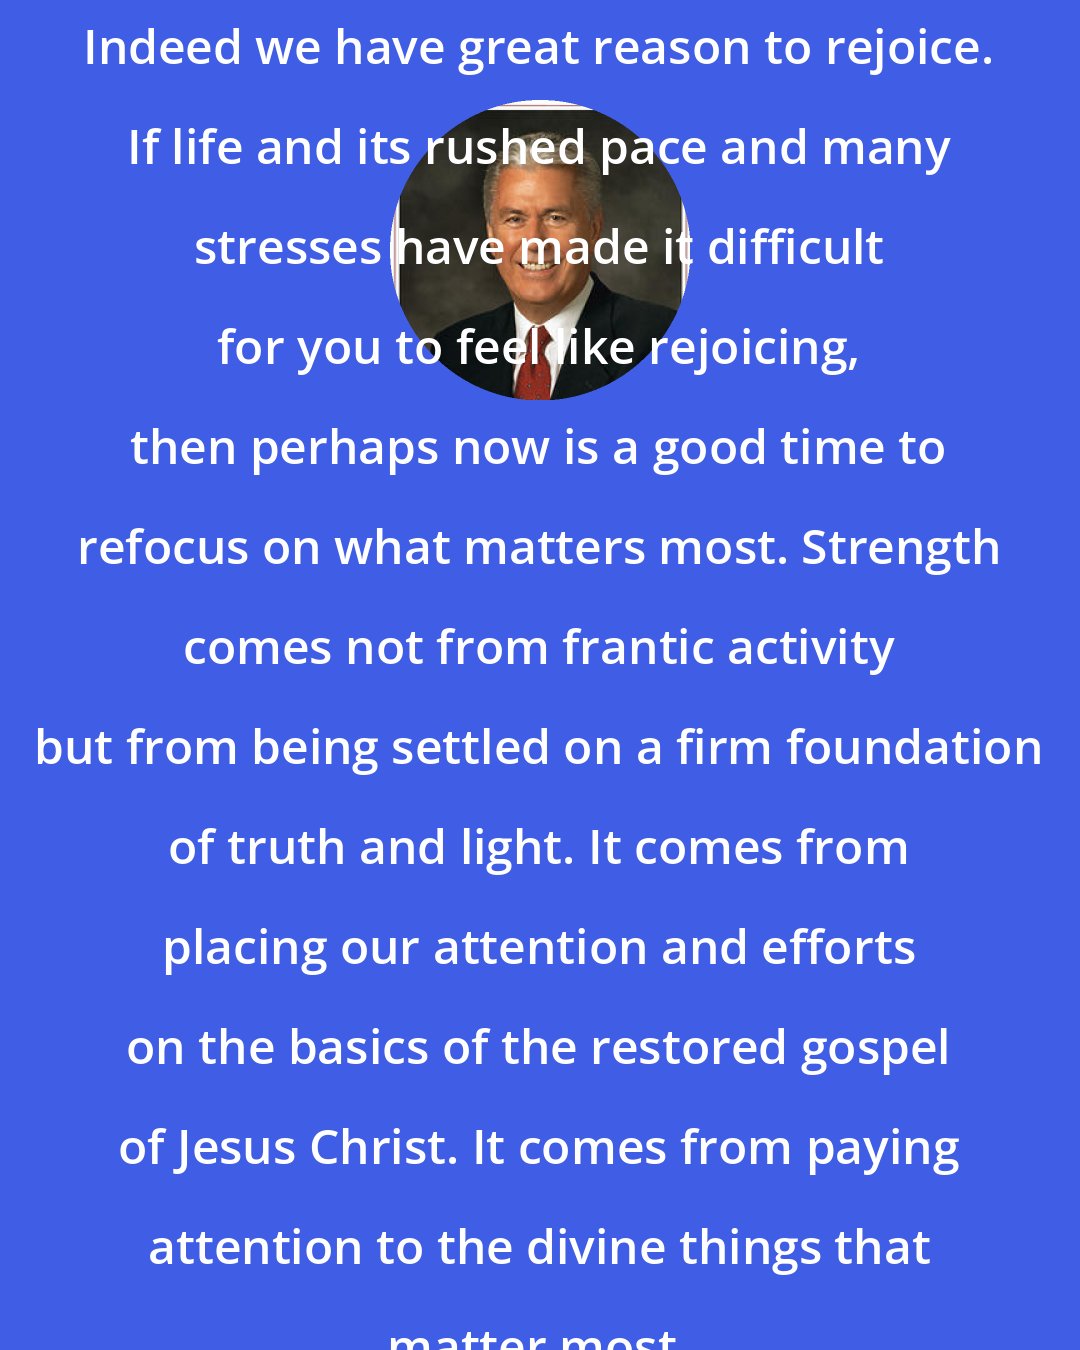 Dieter F. Uchtdorf: Indeed we have great reason to rejoice. If life and its rushed pace and many stresses have made it difficult for you to feel like rejoicing, then perhaps now is a good time to refocus on what matters most. Strength comes not from frantic activity but from being settled on a firm foundation of truth and light. It comes from placing our attention and efforts on the basics of the restored gospel of Jesus Christ. It comes from paying attention to the divine things that matter most.